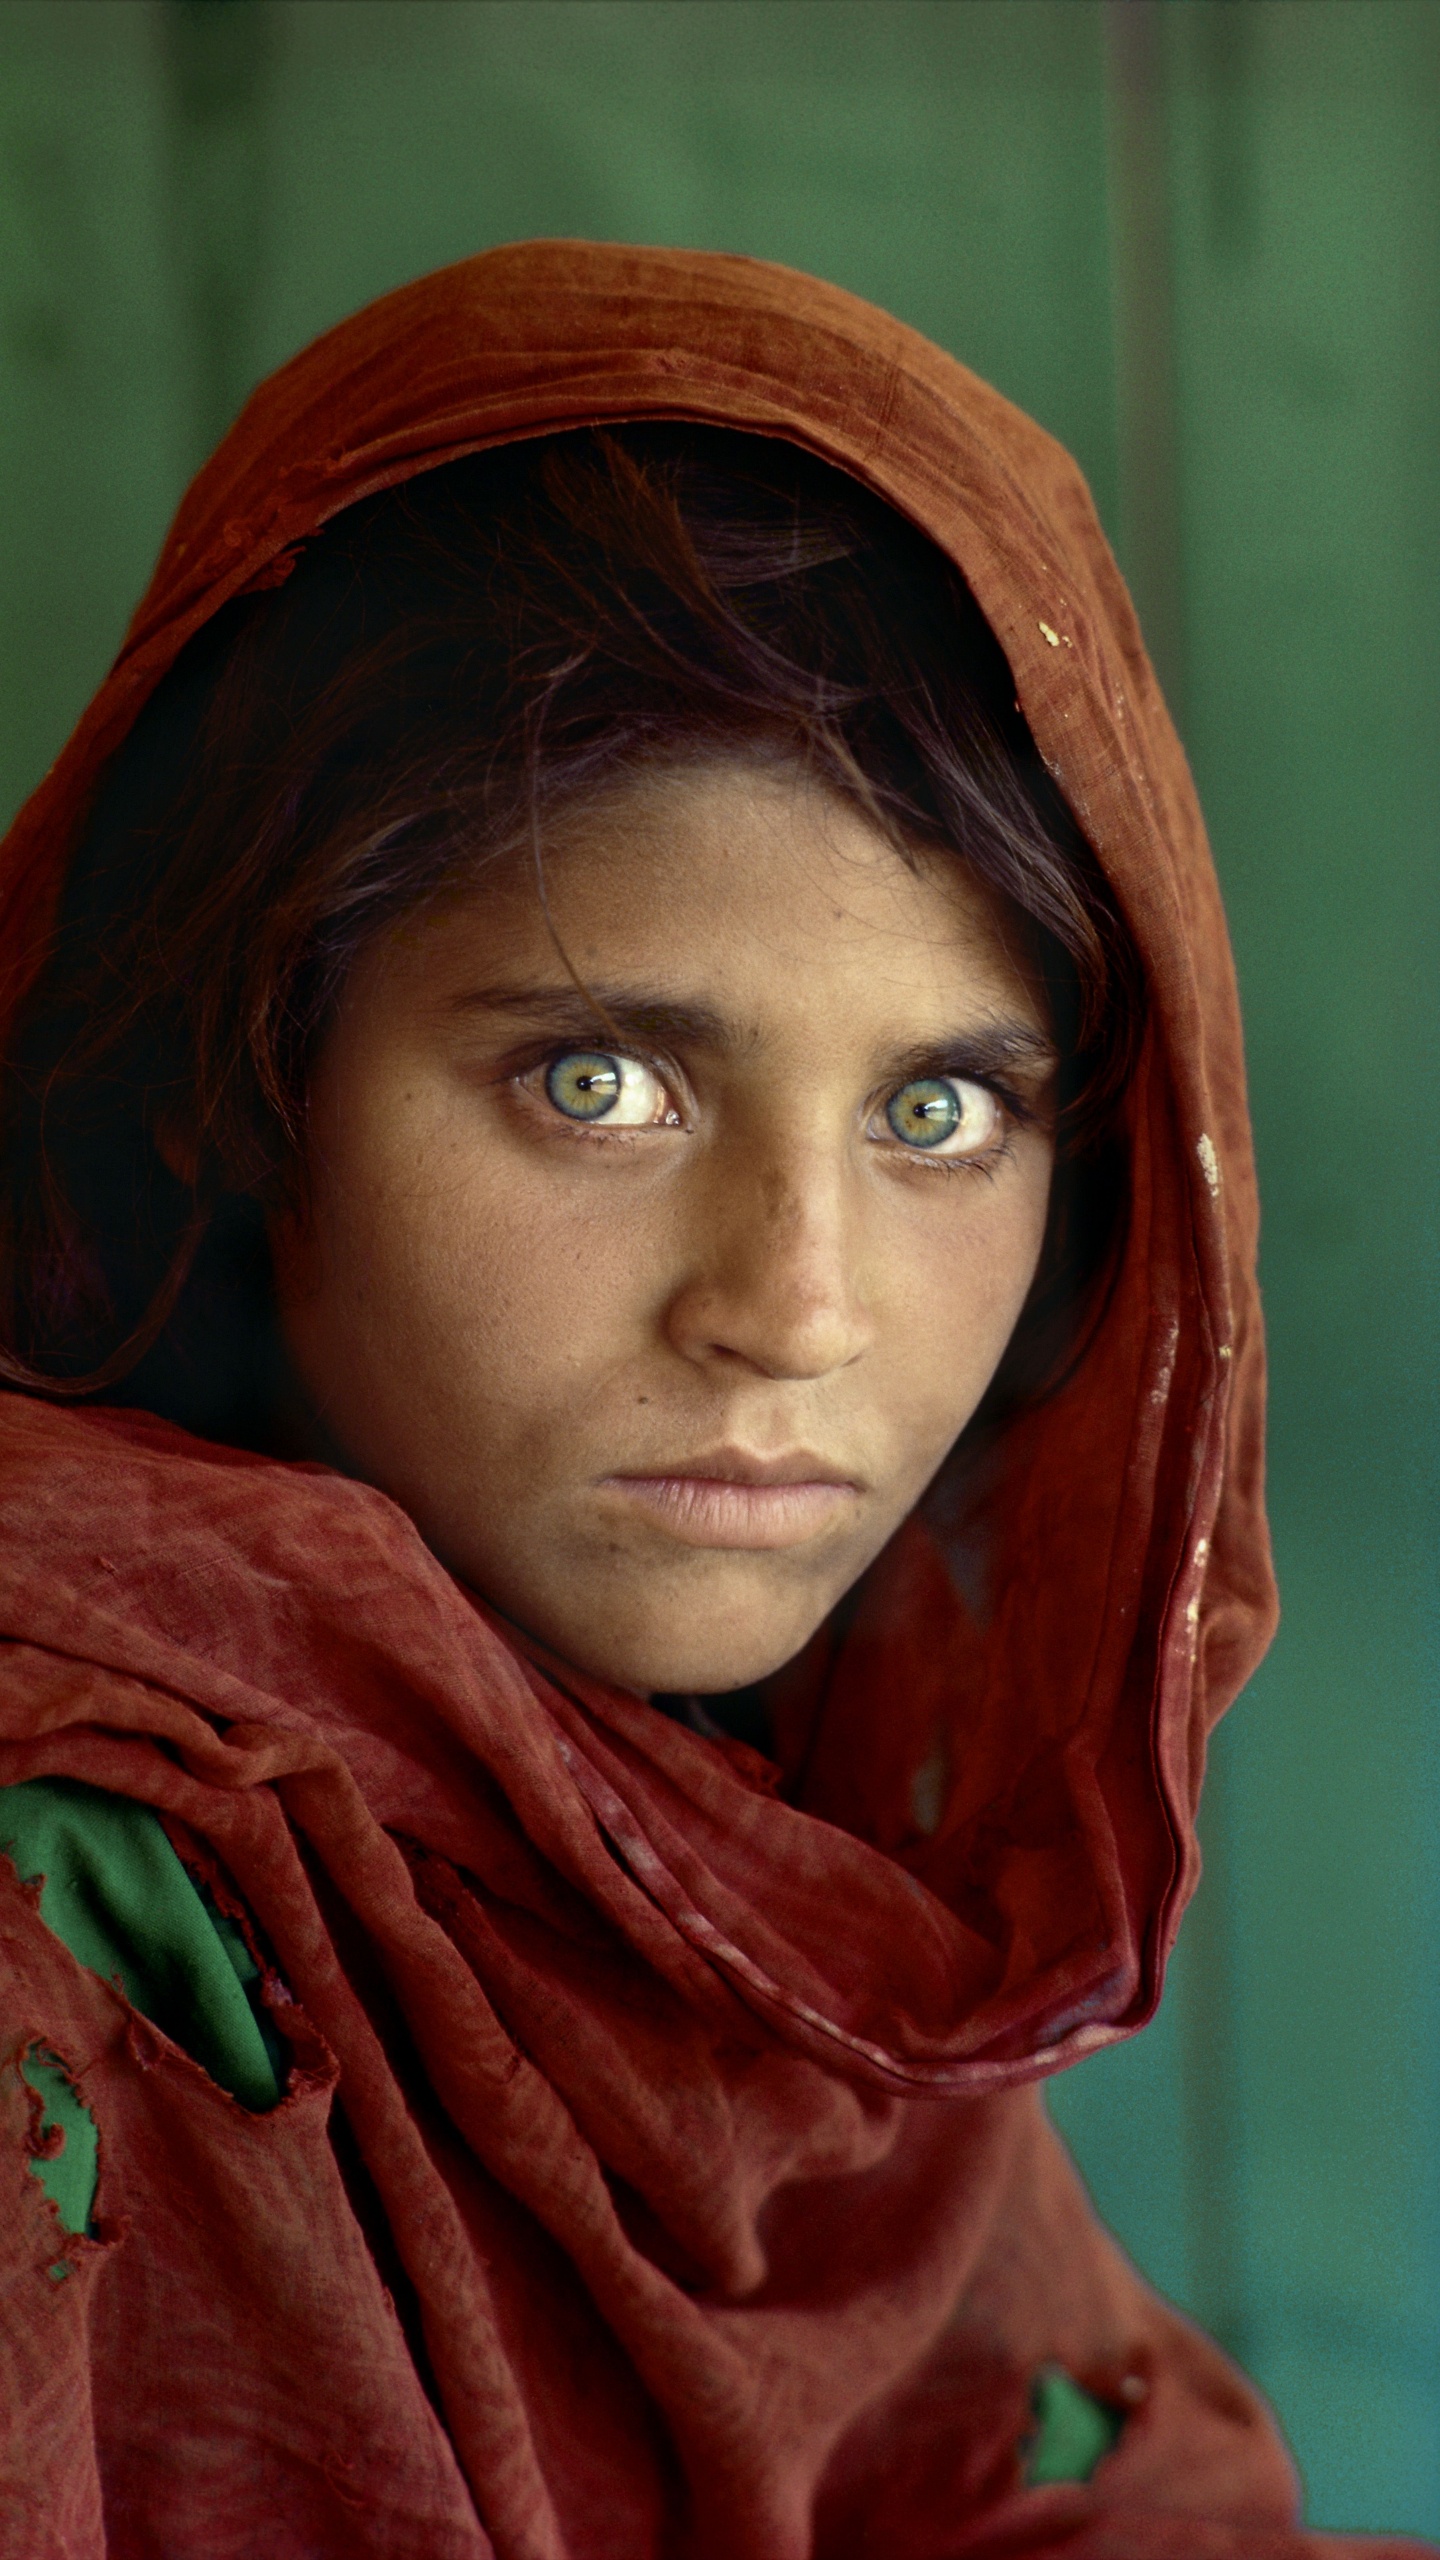 Afghan Girl, Afghanistan, National Geographic, Face, Eye. Wallpaper in 1440x2560 Resolution